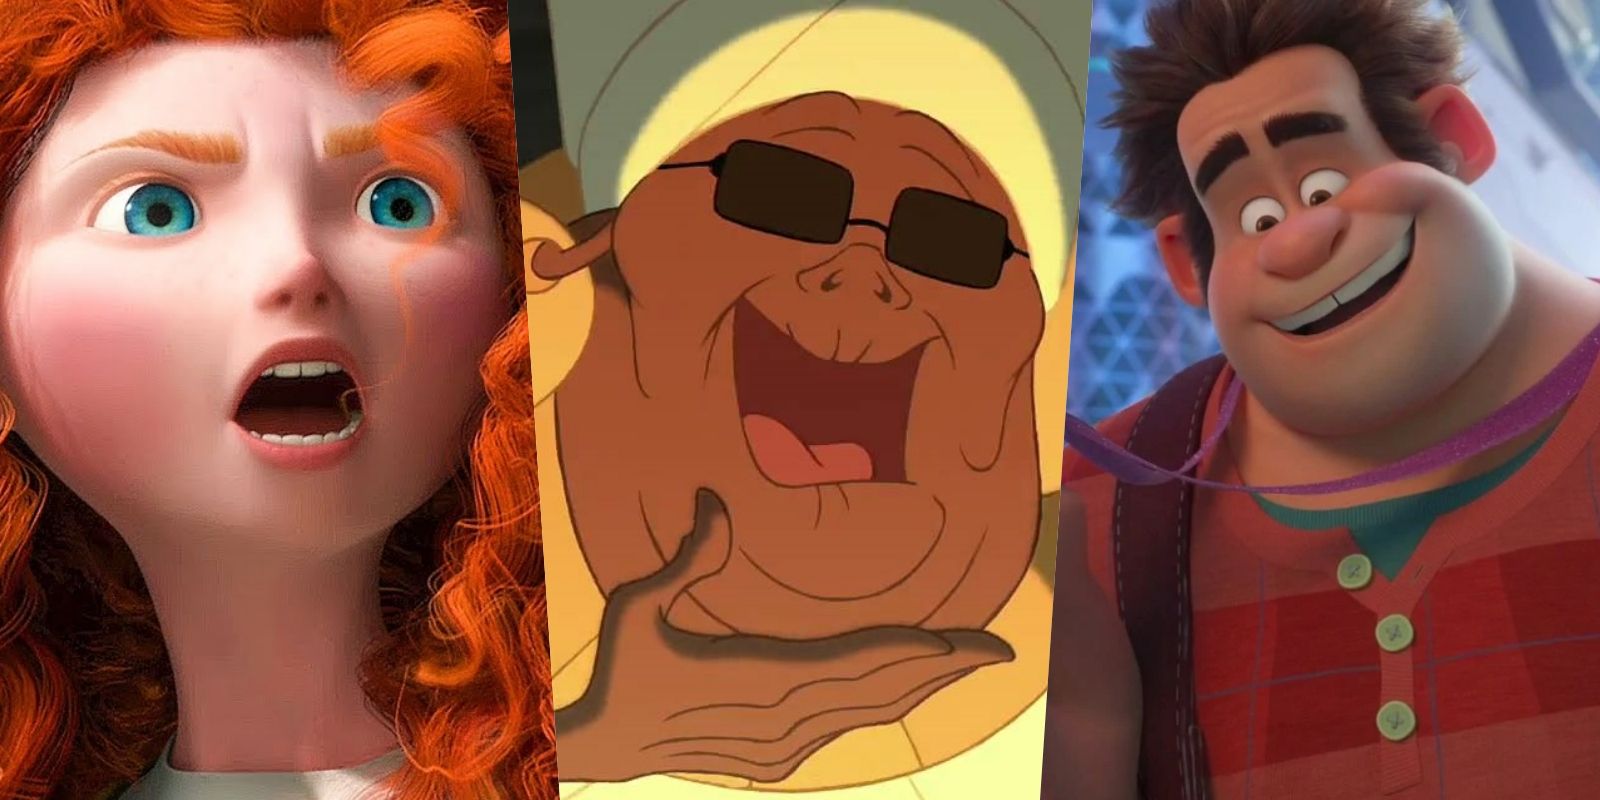 A split image of Disney's Princess Merida from Brave, Mama Odie from Princess & The Frog, and Wreck-It Ralph